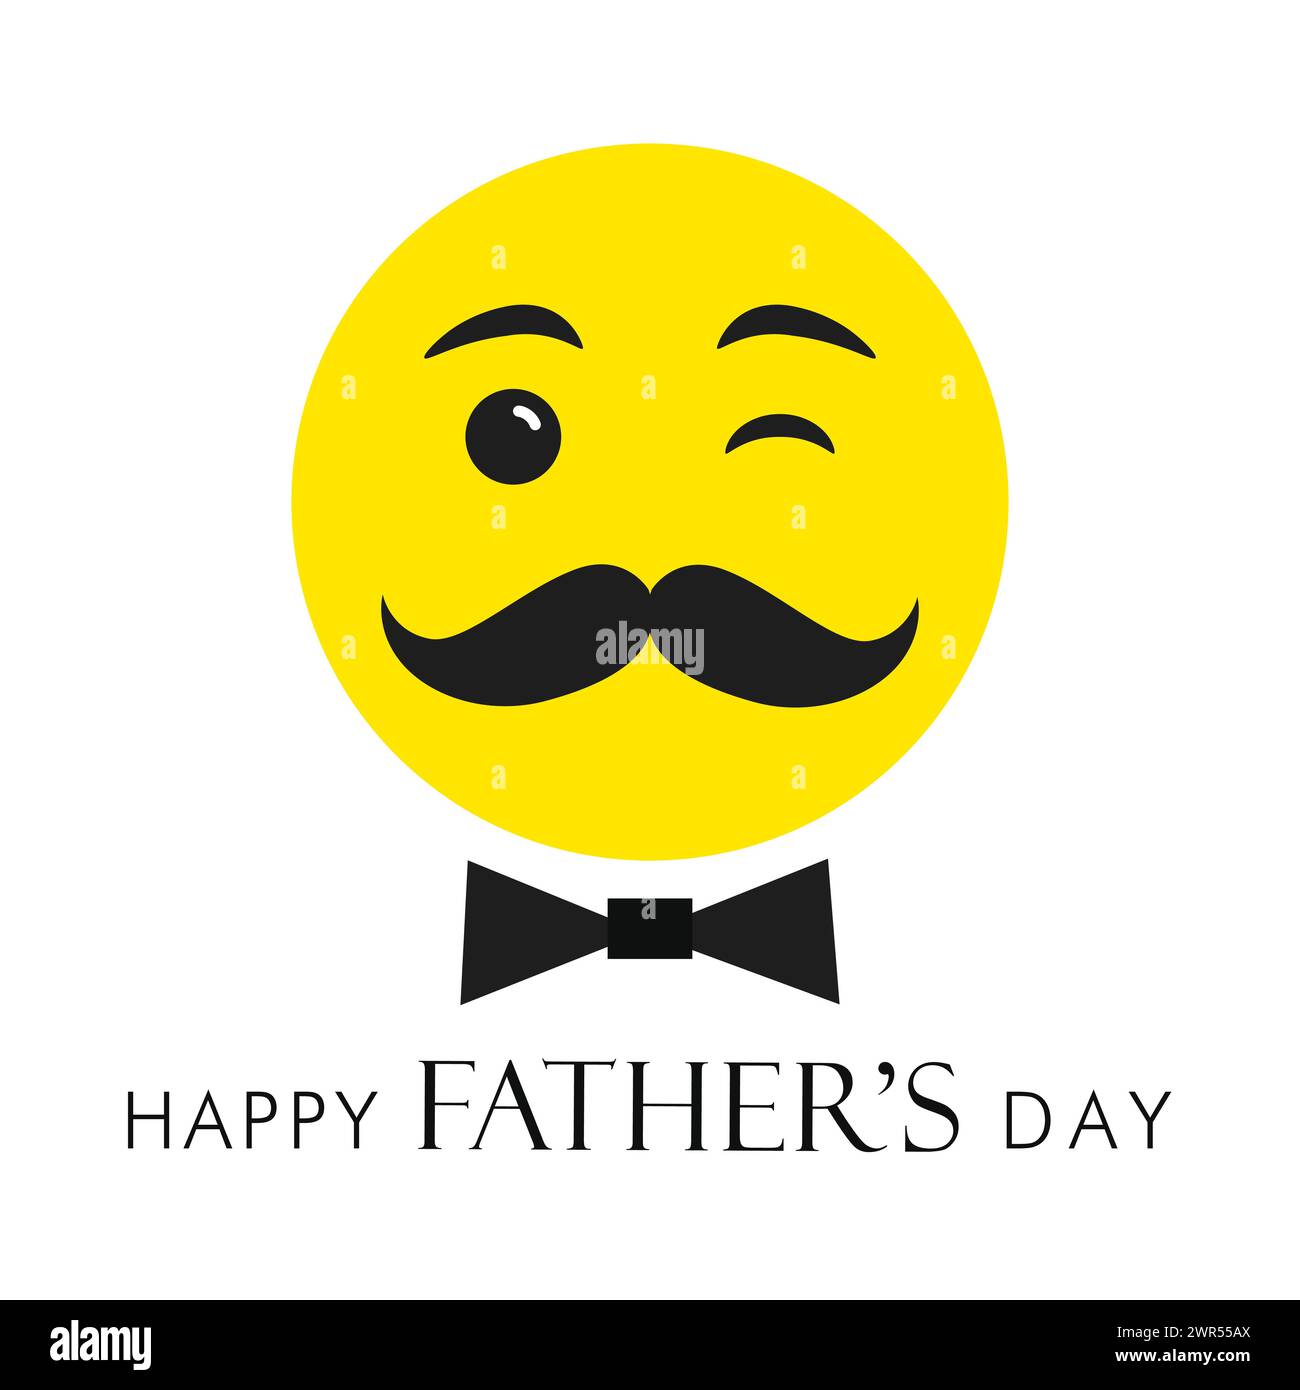 Happy Father's Day trendy greeting card. Cute web face icon with mustache. Winking emoticon. Social media poster. Internet network timeline post. Stock Vector